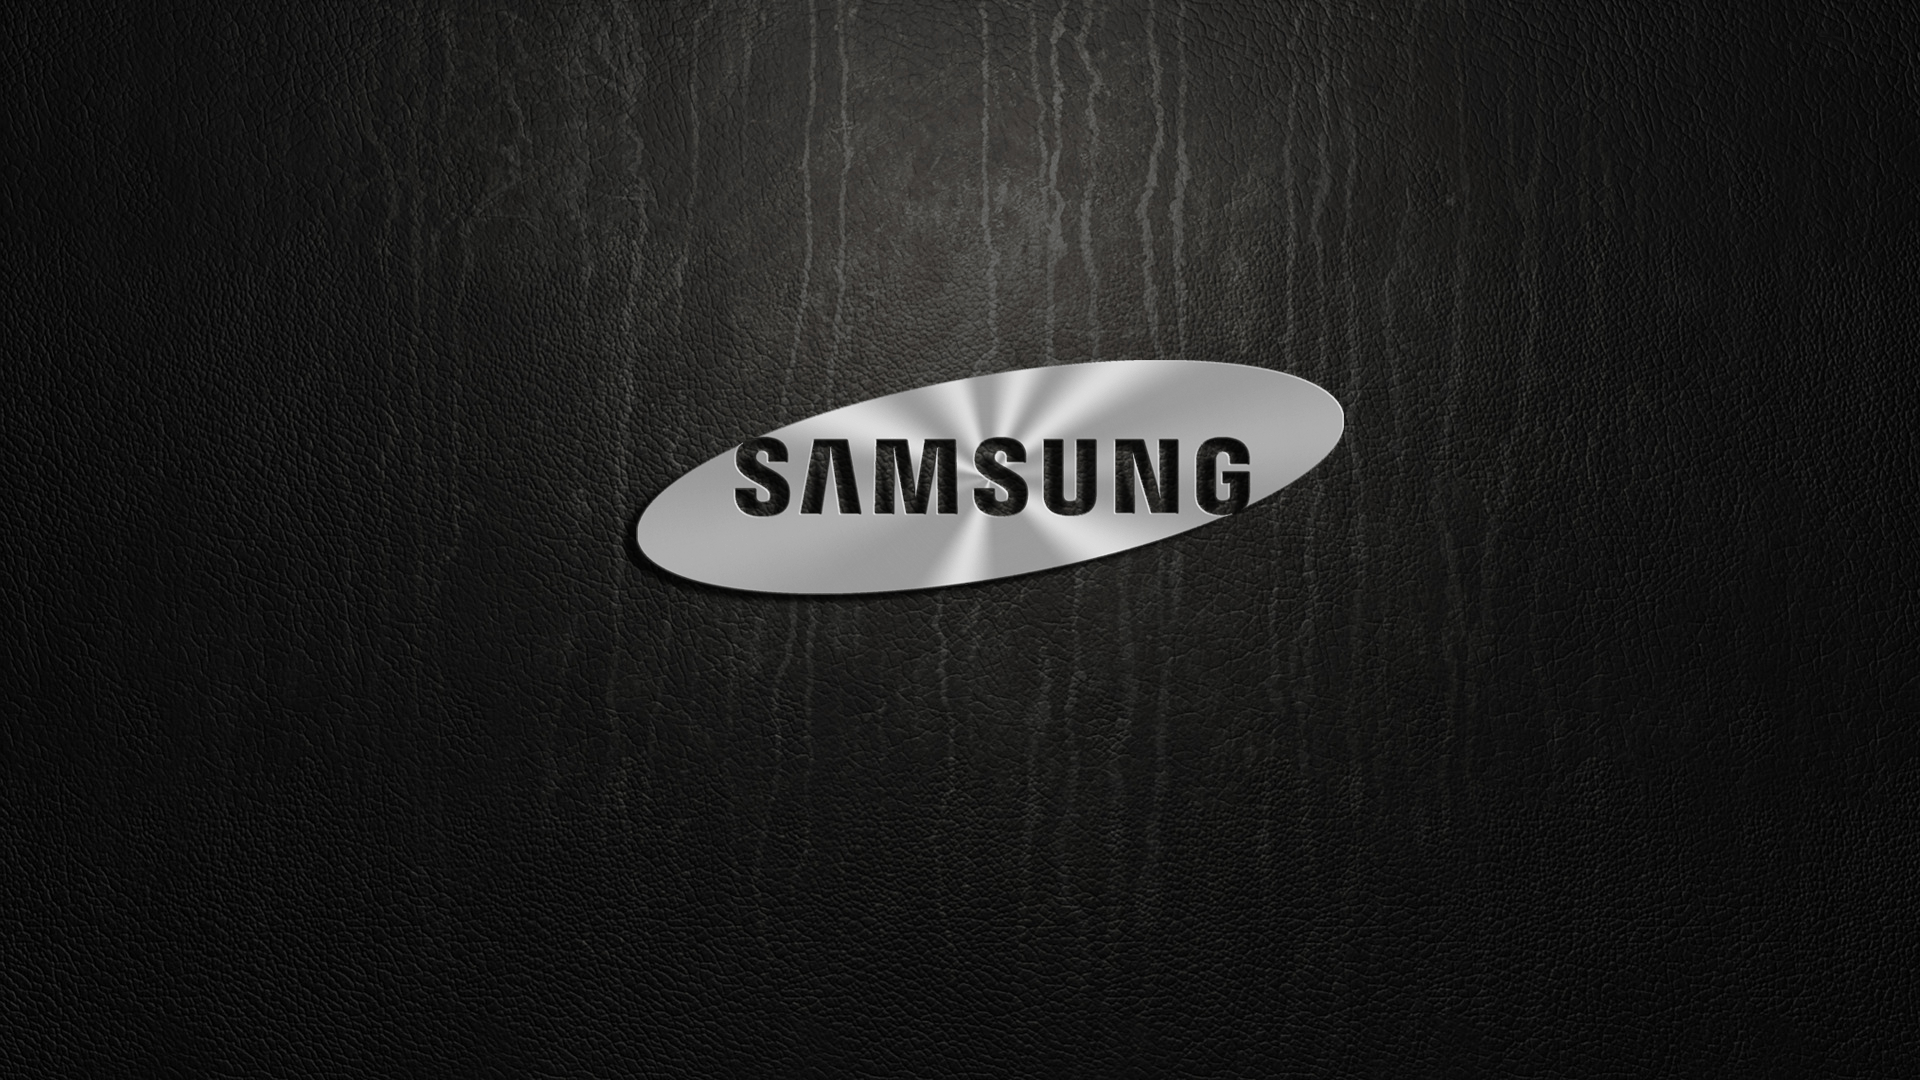 Samsung Full HD Wallpaper and Background Imagex1080